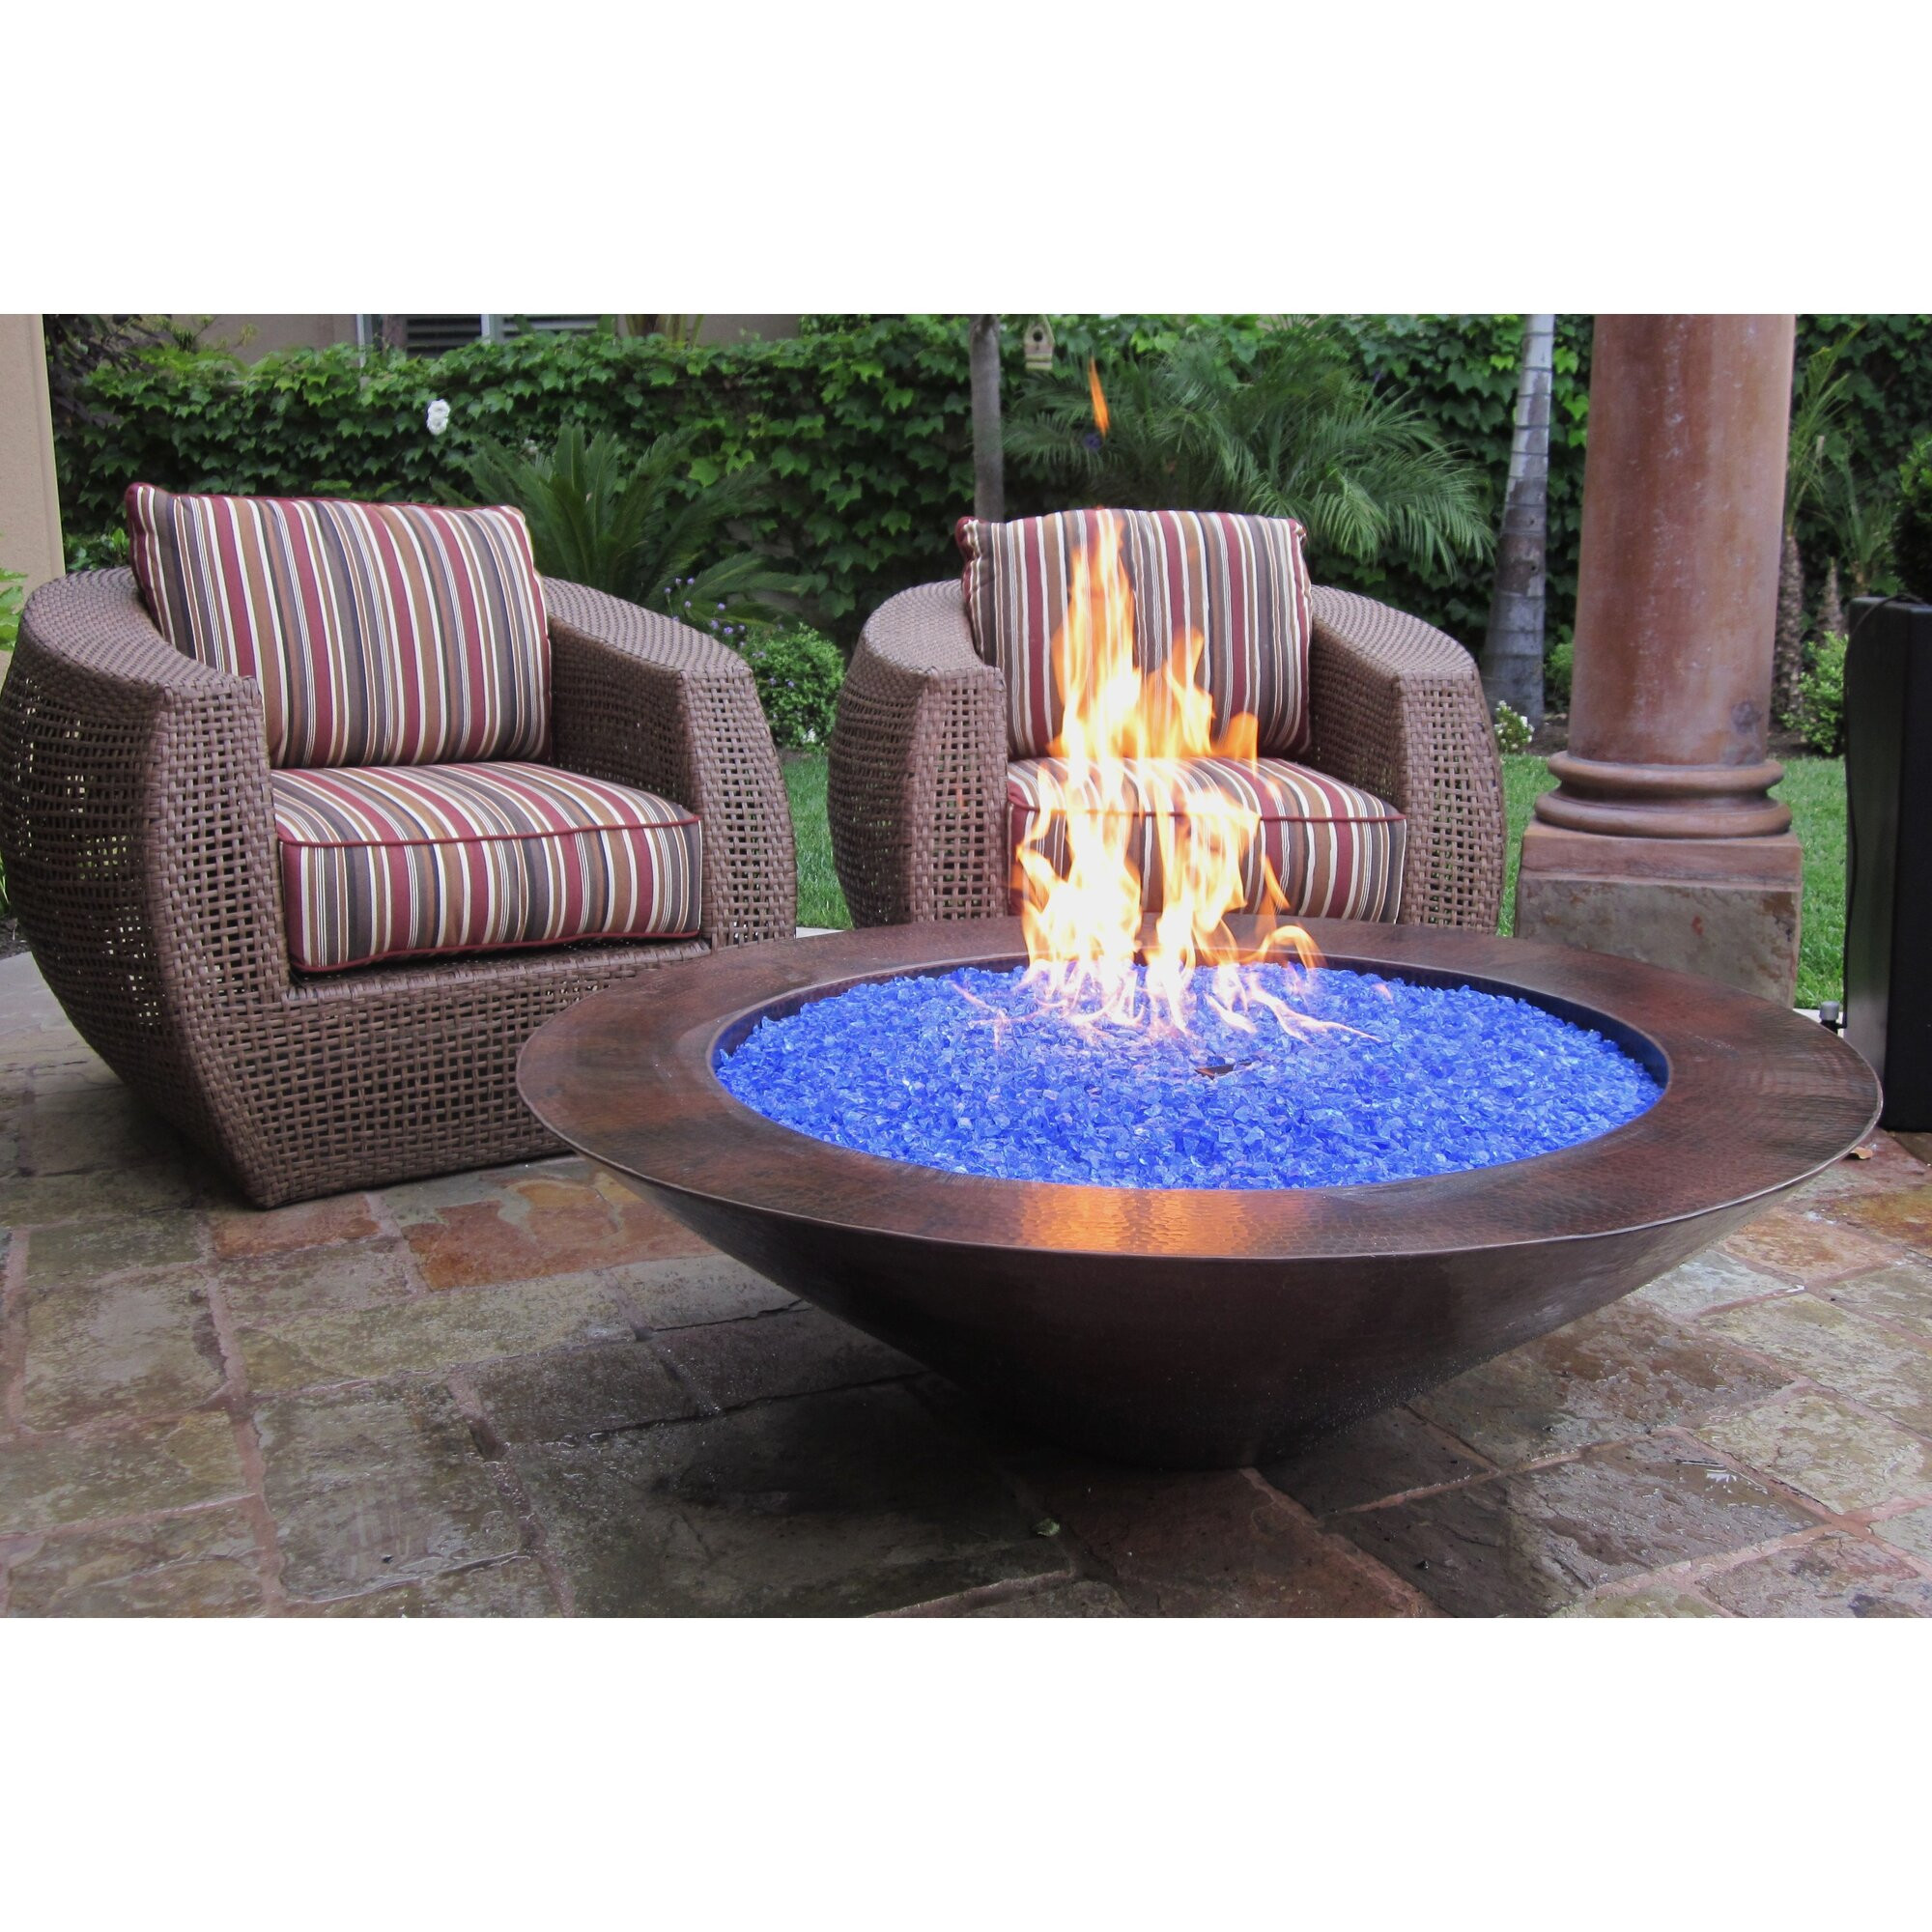 Propane Patio Fire Pit
 Grand Effects Es Propane Fire Pit